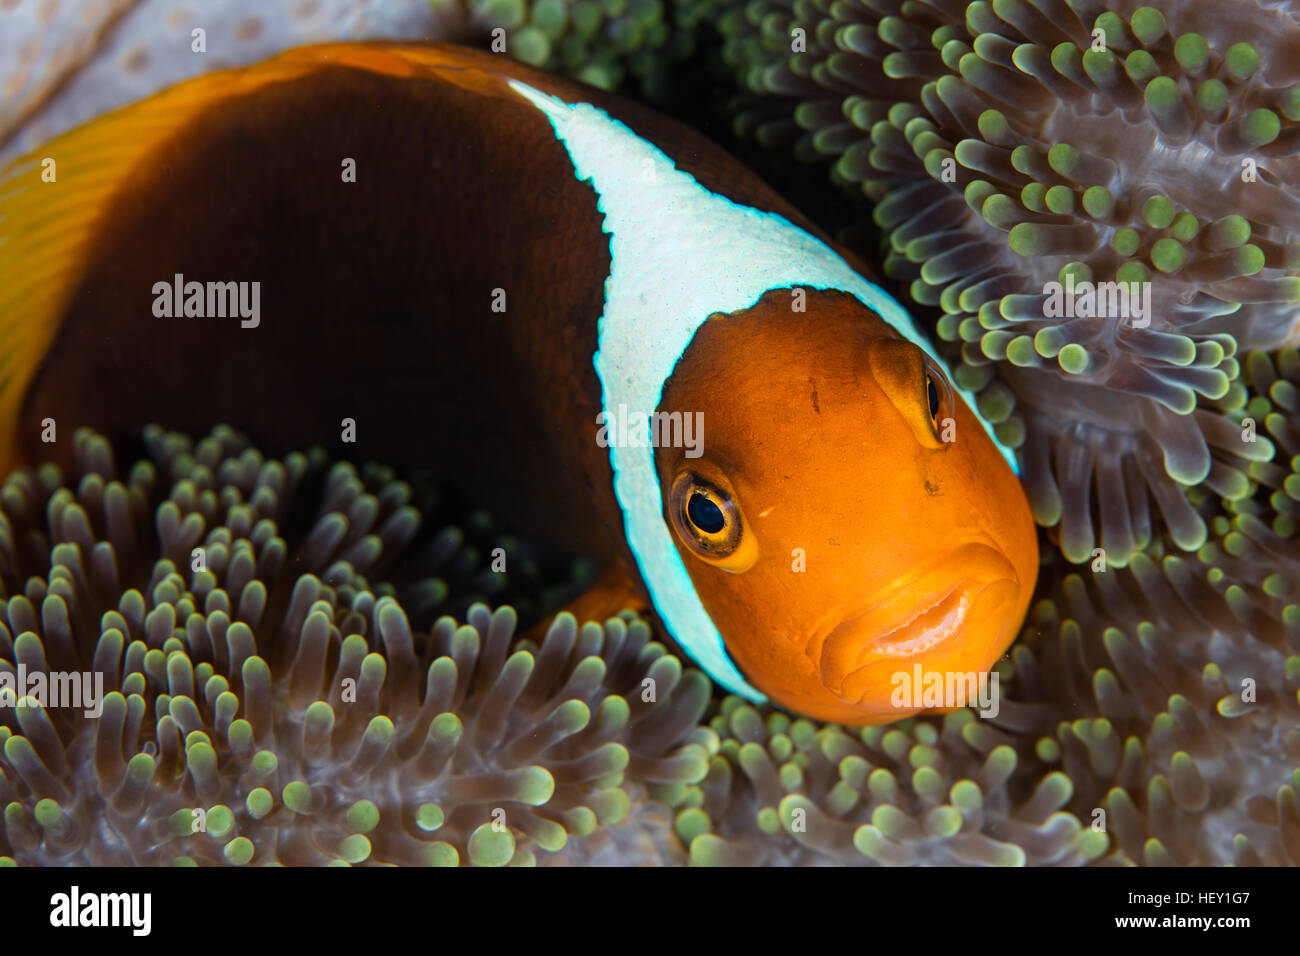 A White Bonnet anemonefish (Amphiprion leucokranos) swims among the tentacles of its host anemone in the Solomon Islands. Stock Photo